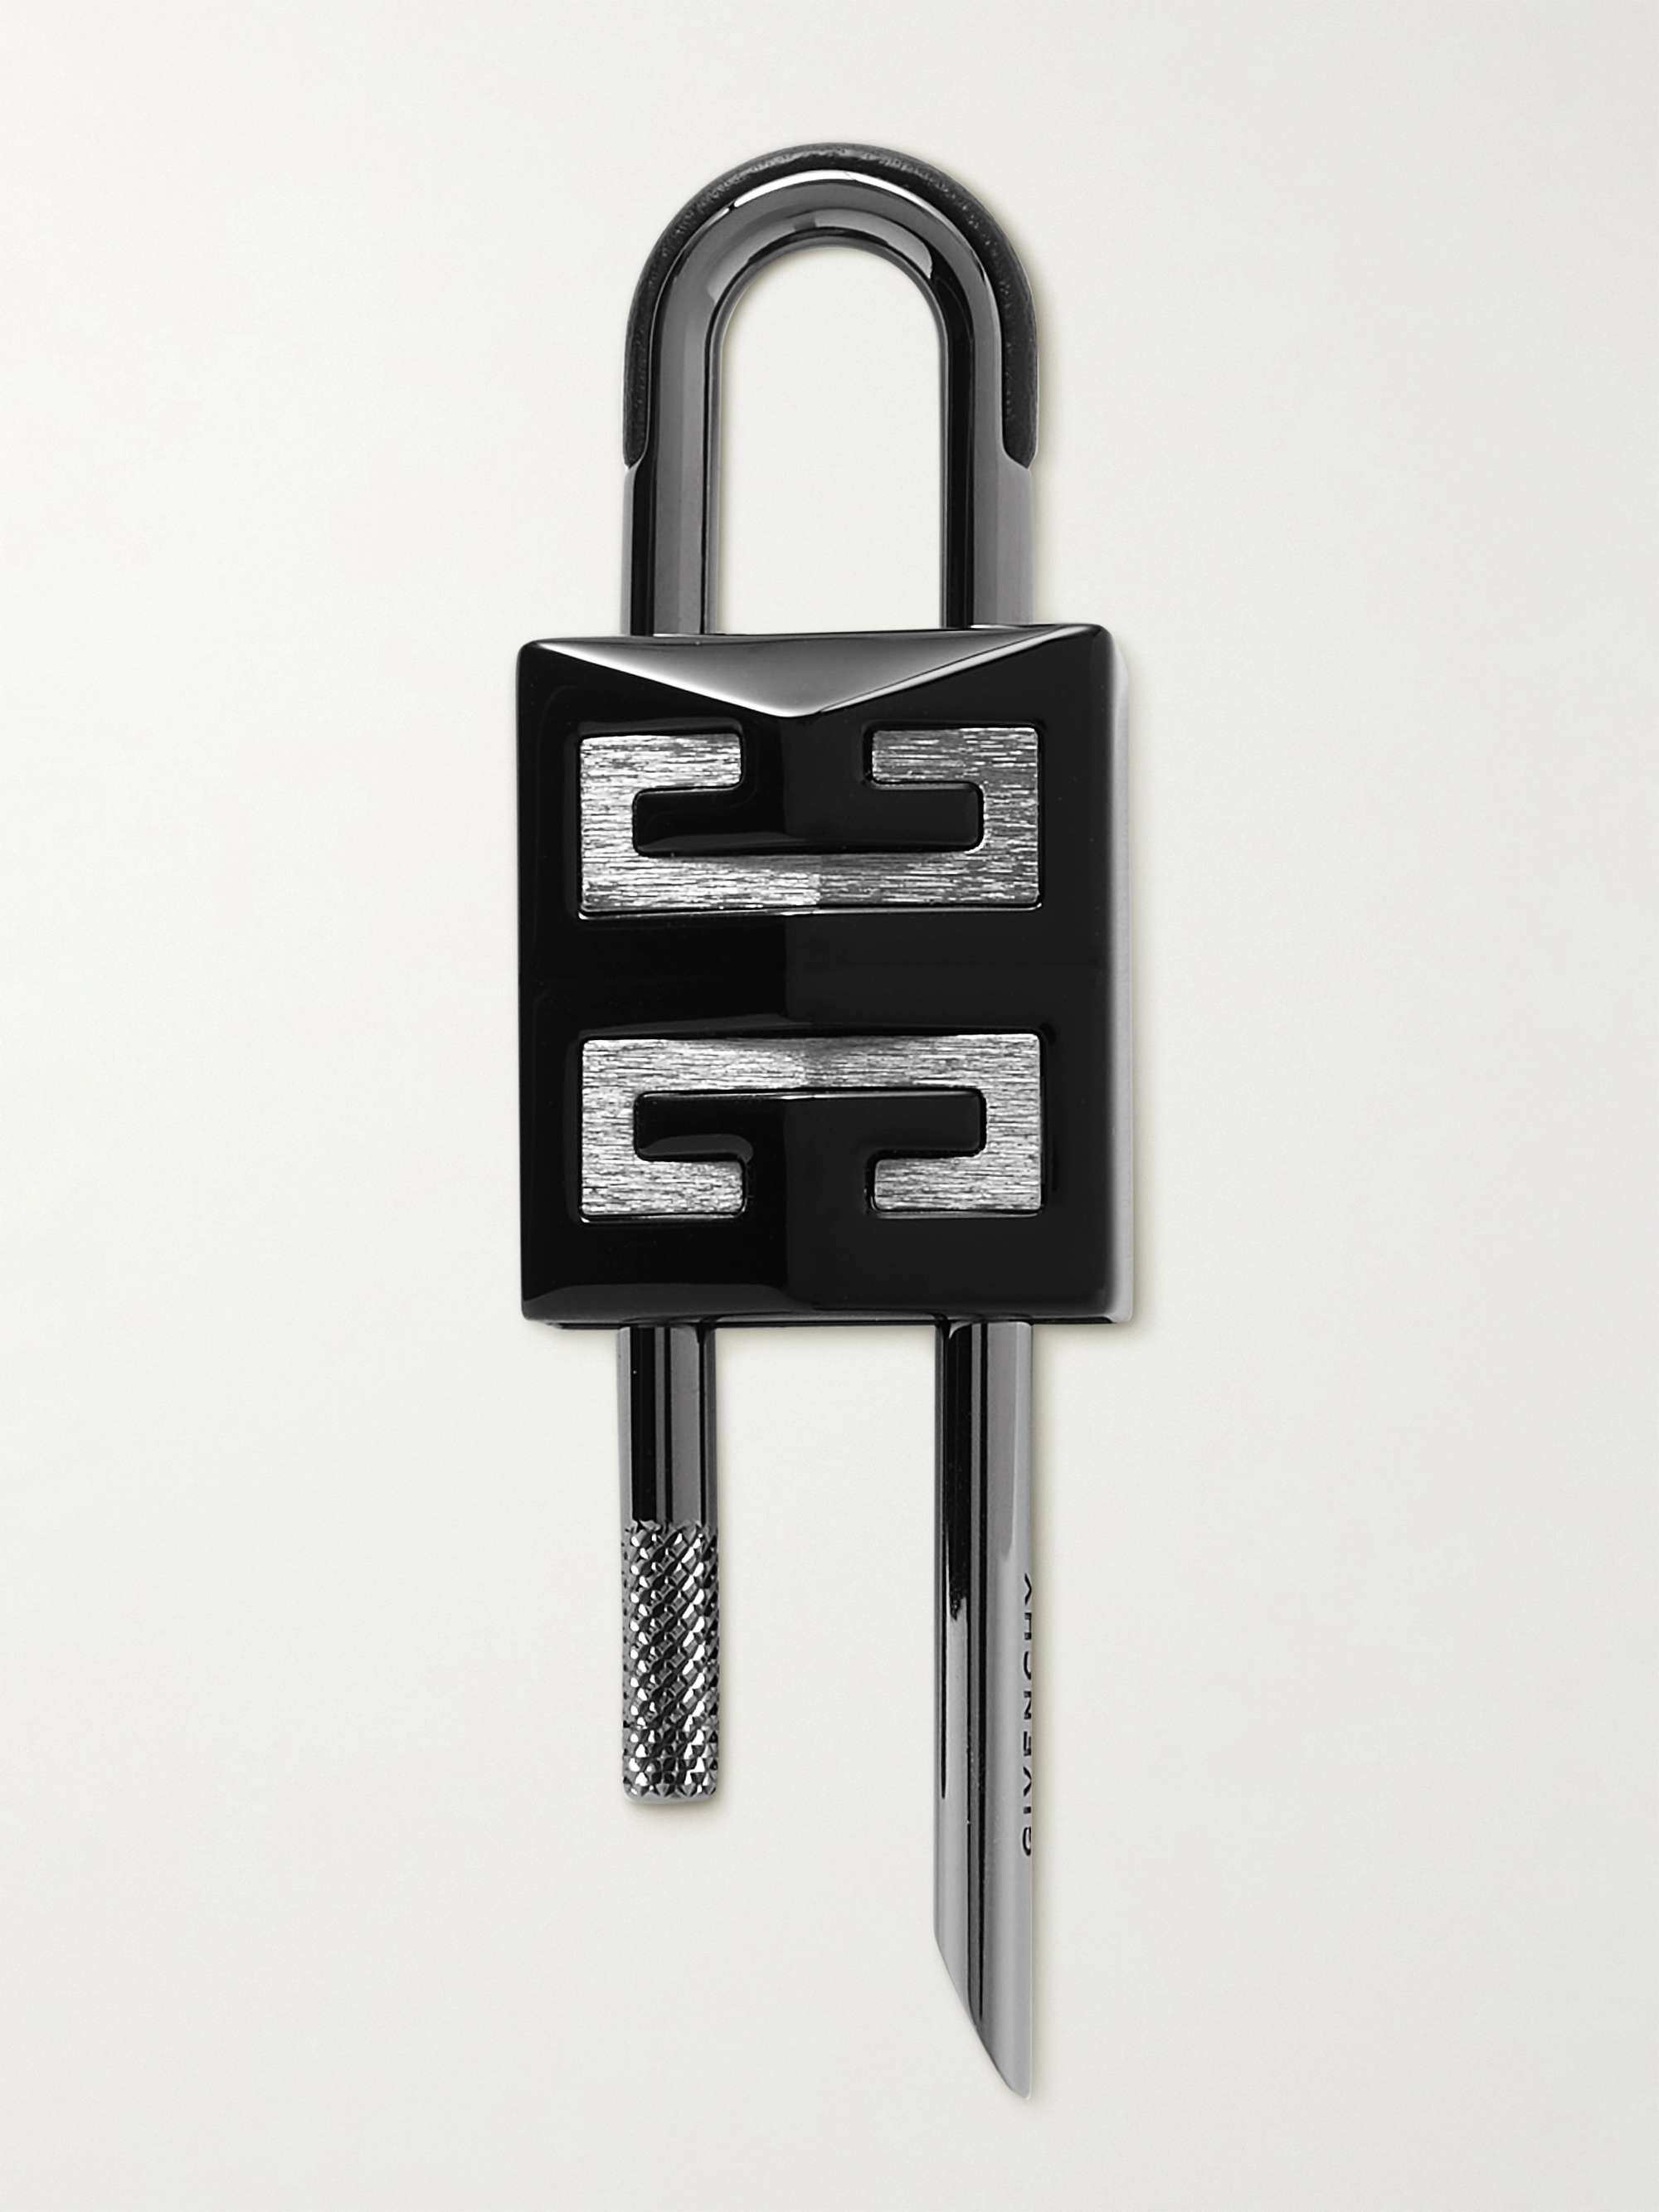 GIVENCHY Logo-Detailed Leather-Trimmed Two-Tone Metal Padlock